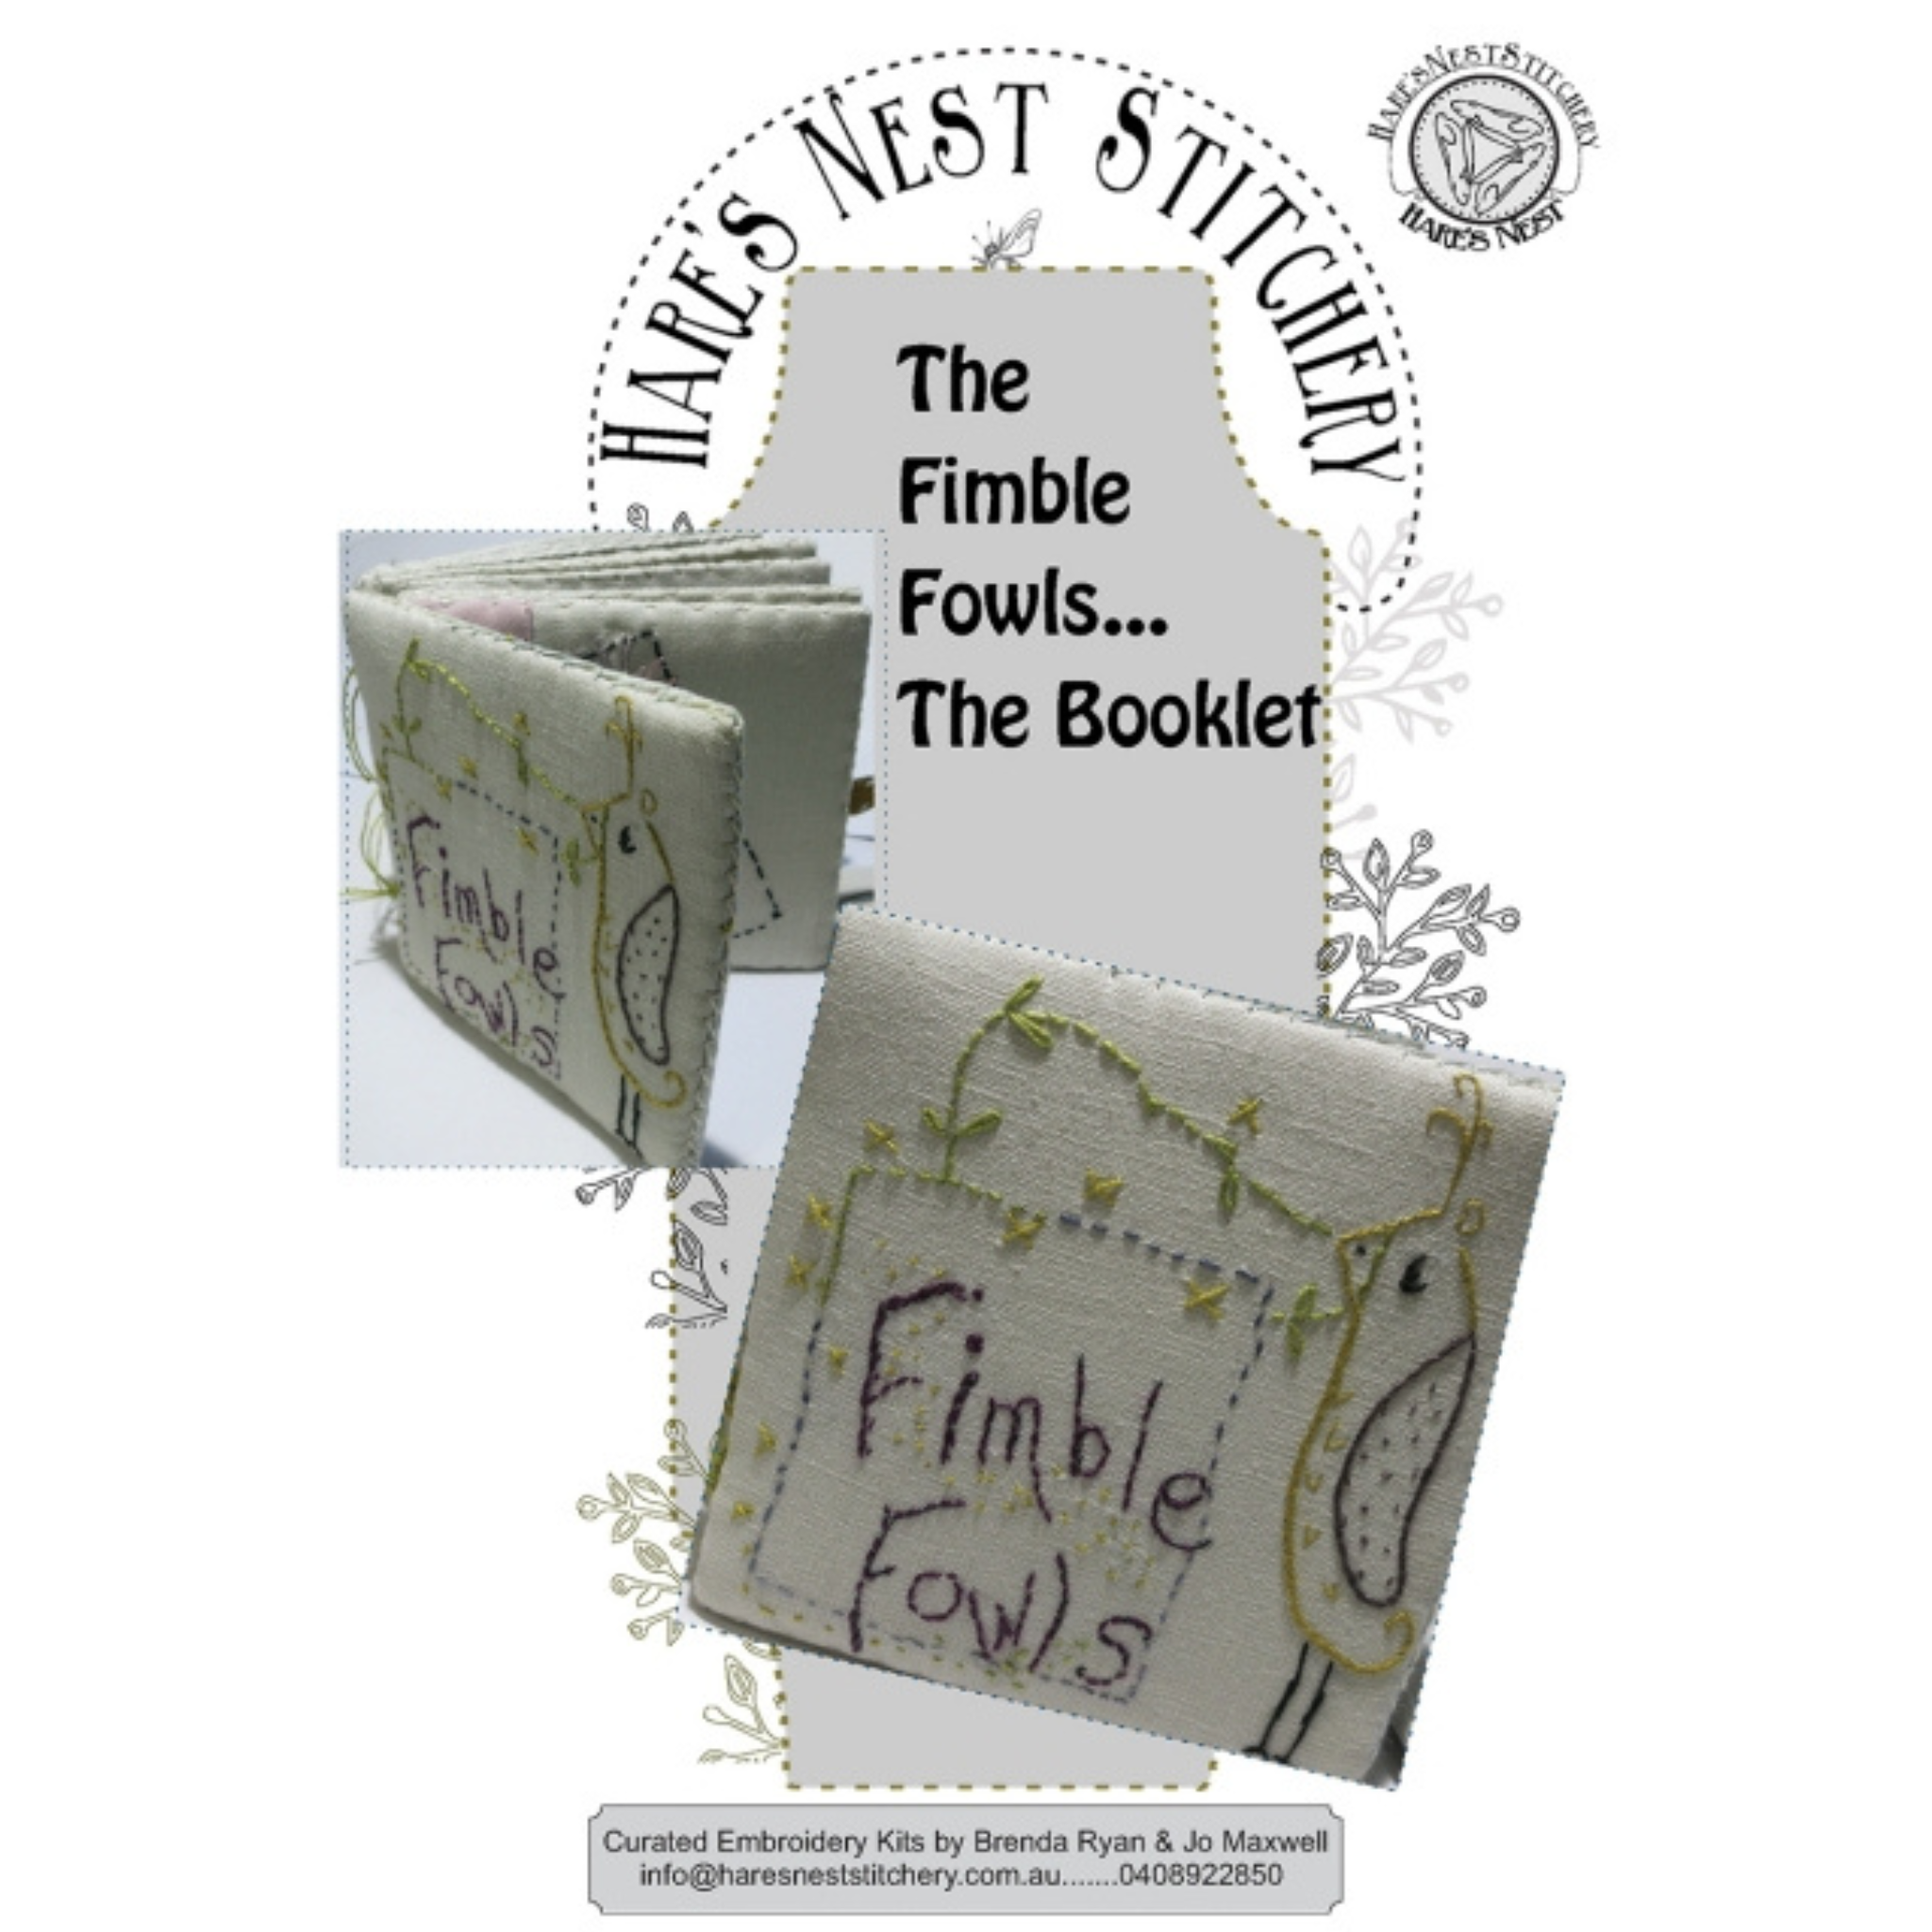 HARES NEST - THE FIMBLE FOWLS...THE BOOKLET